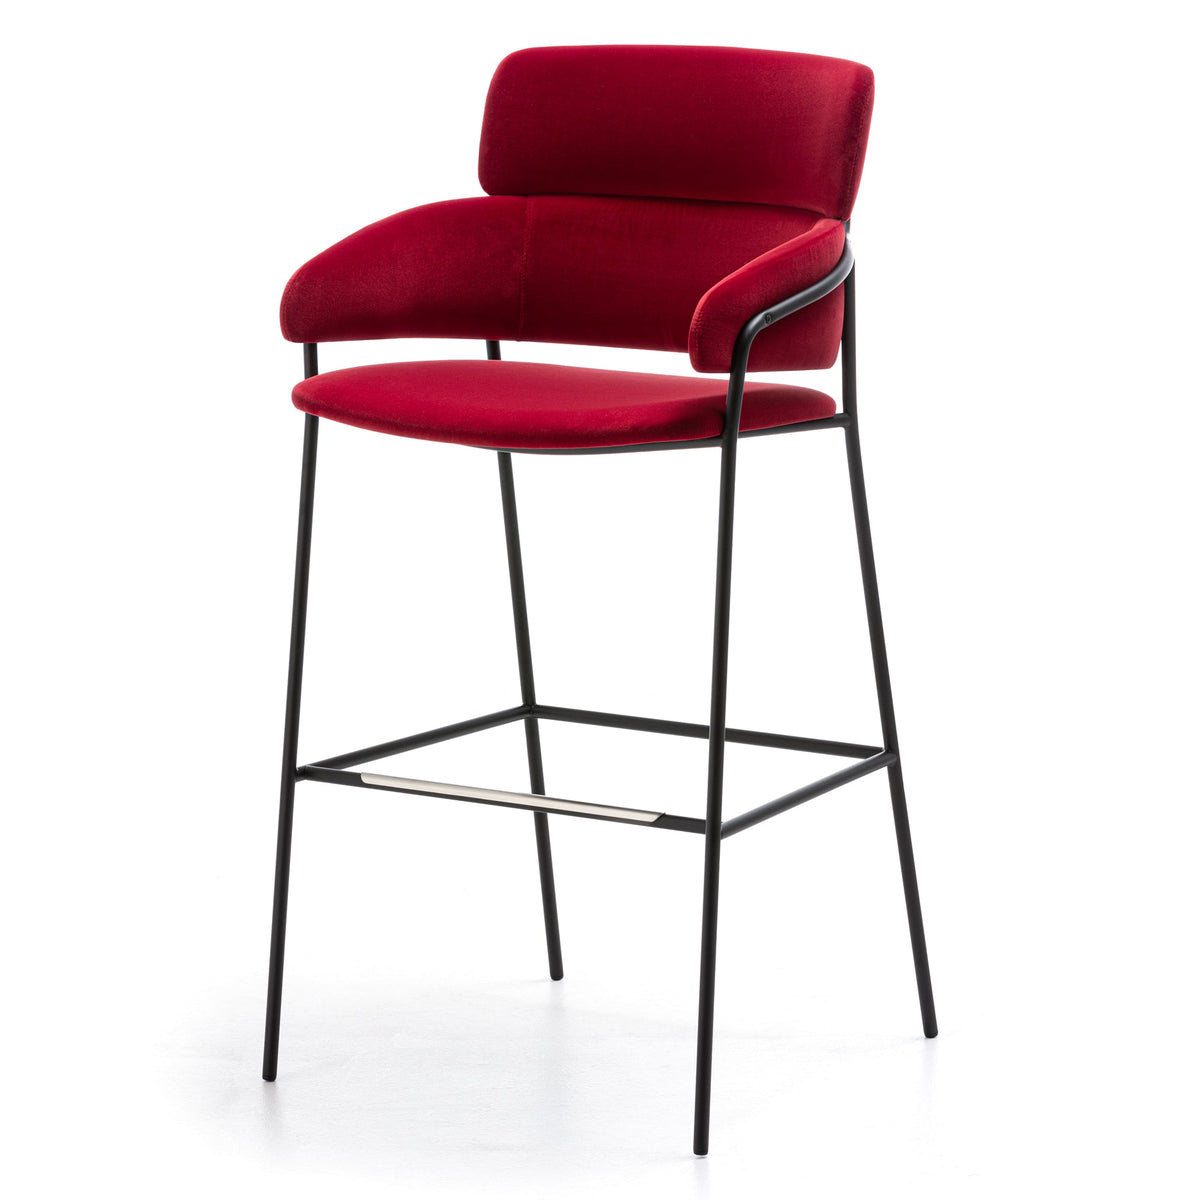 Strike XL High Stool-Arrmet-Contract Furniture Store